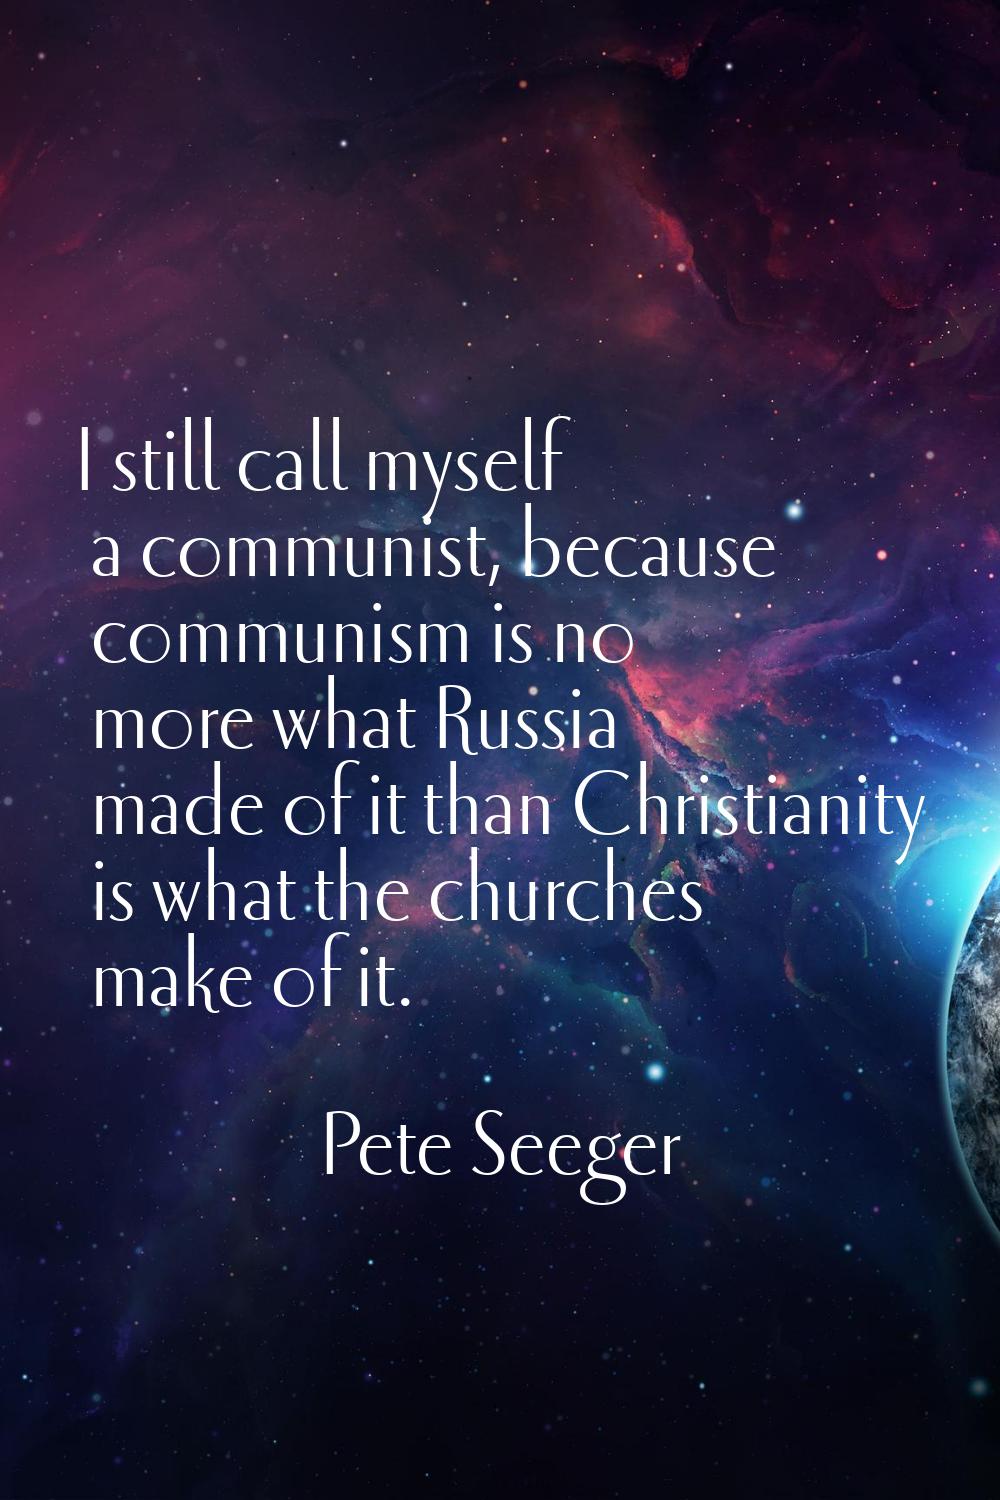 I still call myself a communist, because communism is no more what Russia made of it than Christian